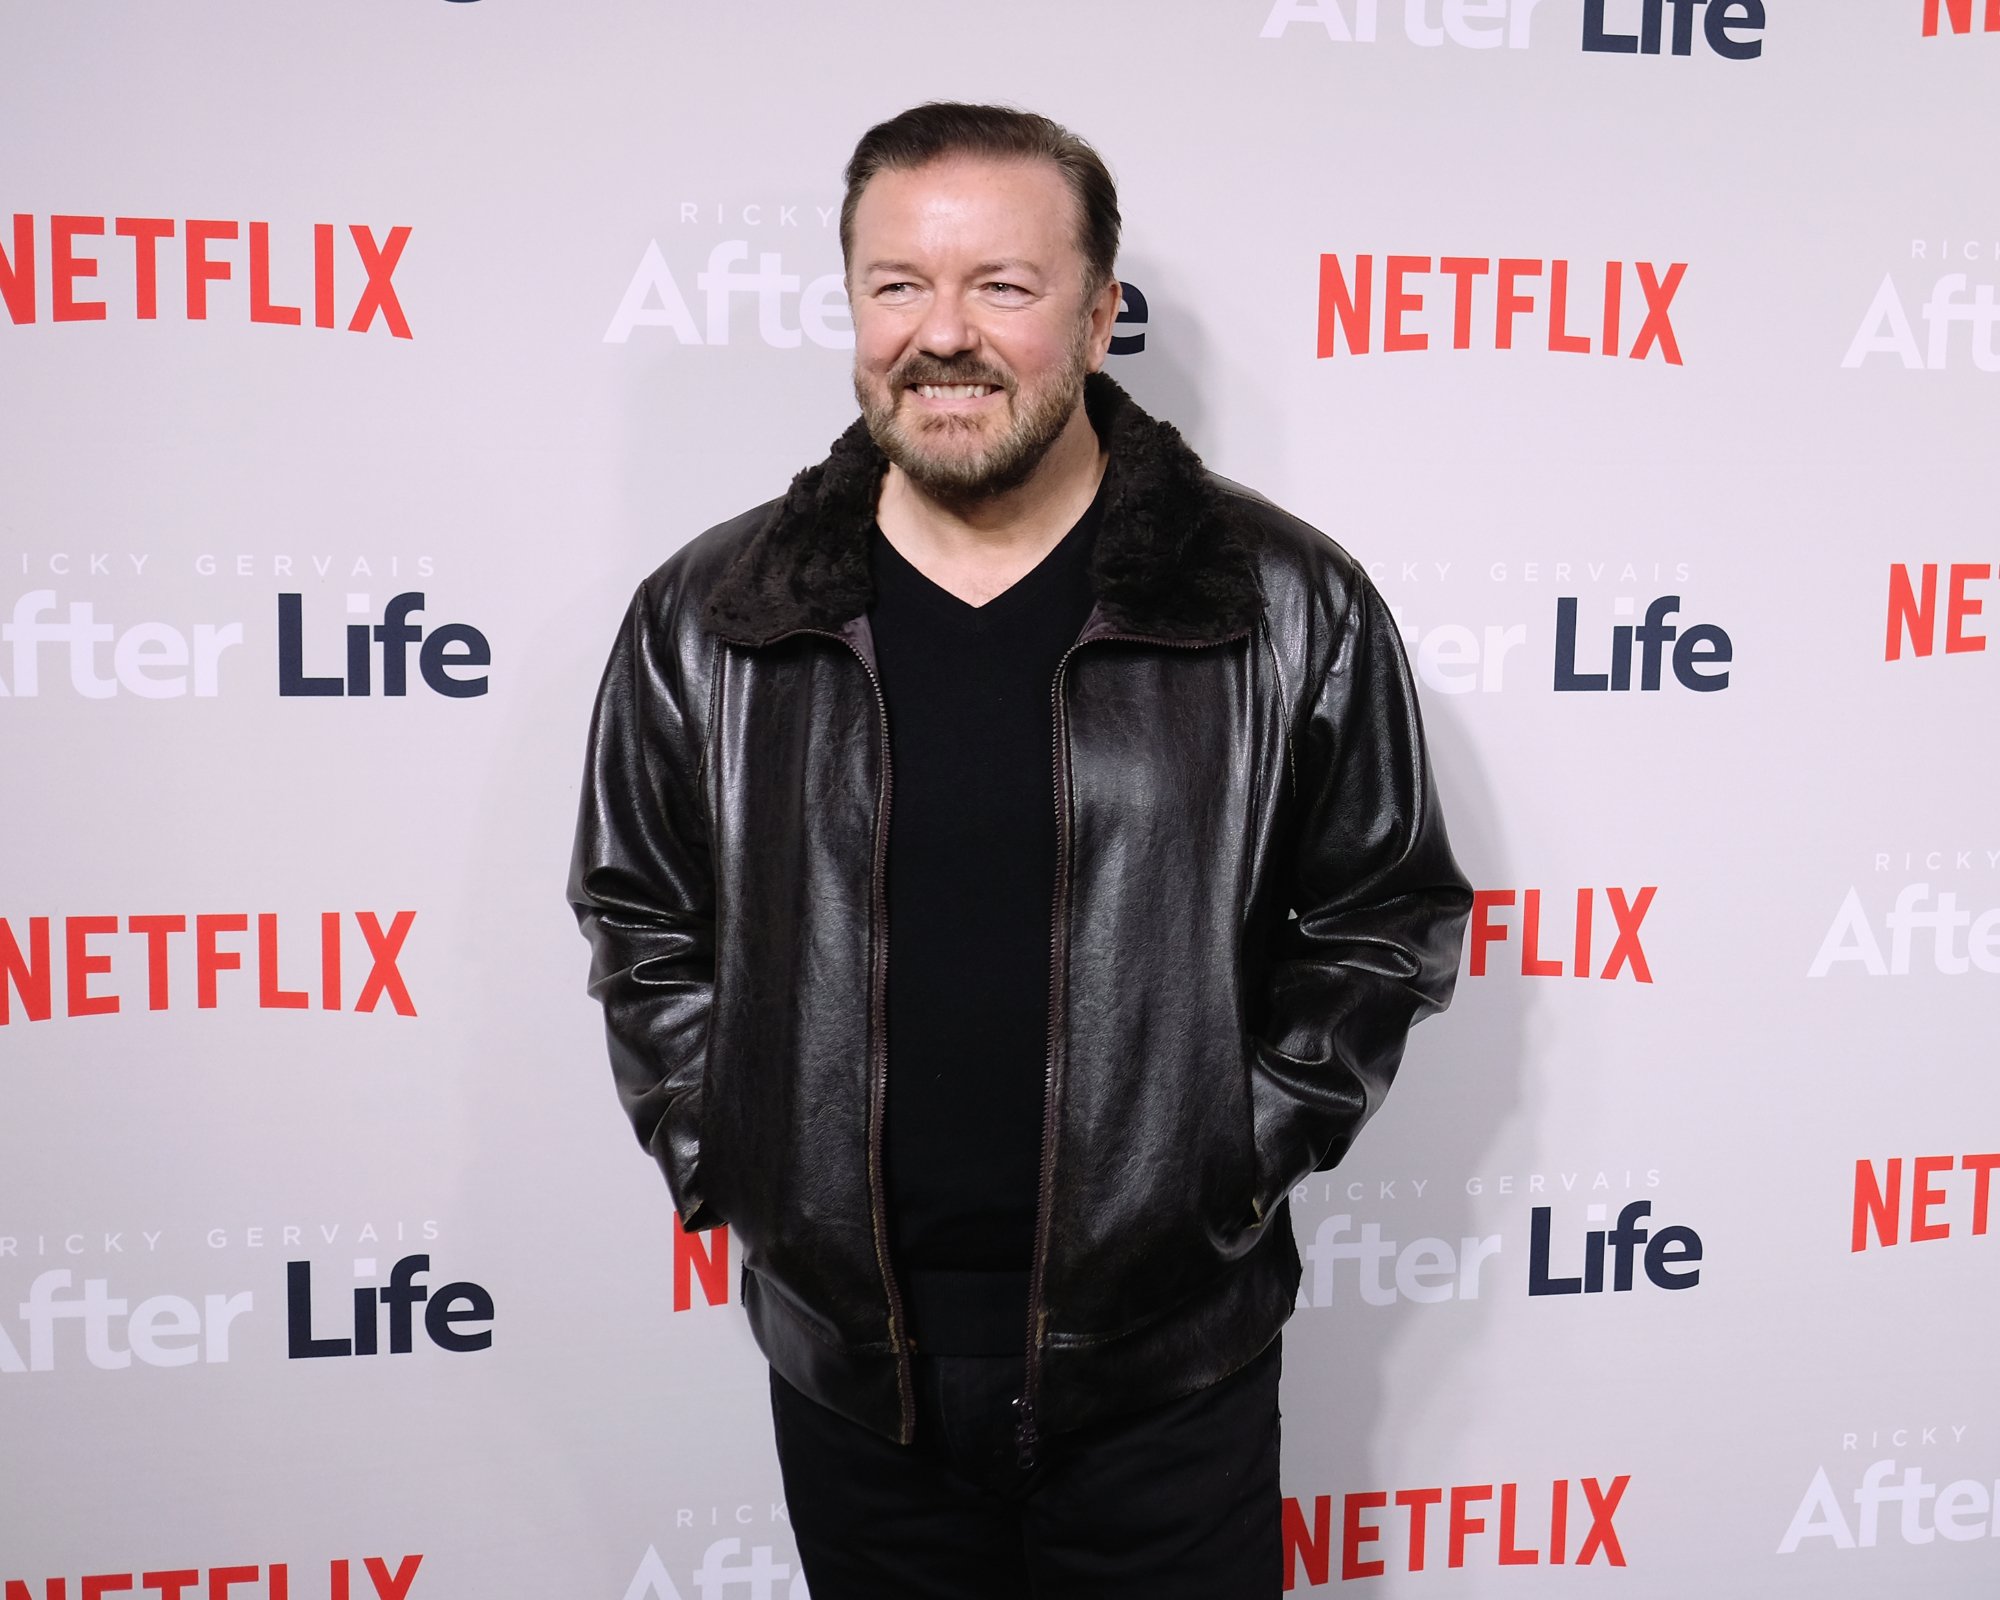 Ricky Gervais, who formulates his comedy from Twitter. He's wearing a leather jacket with his hands in his pockets in front of a step and repeat.